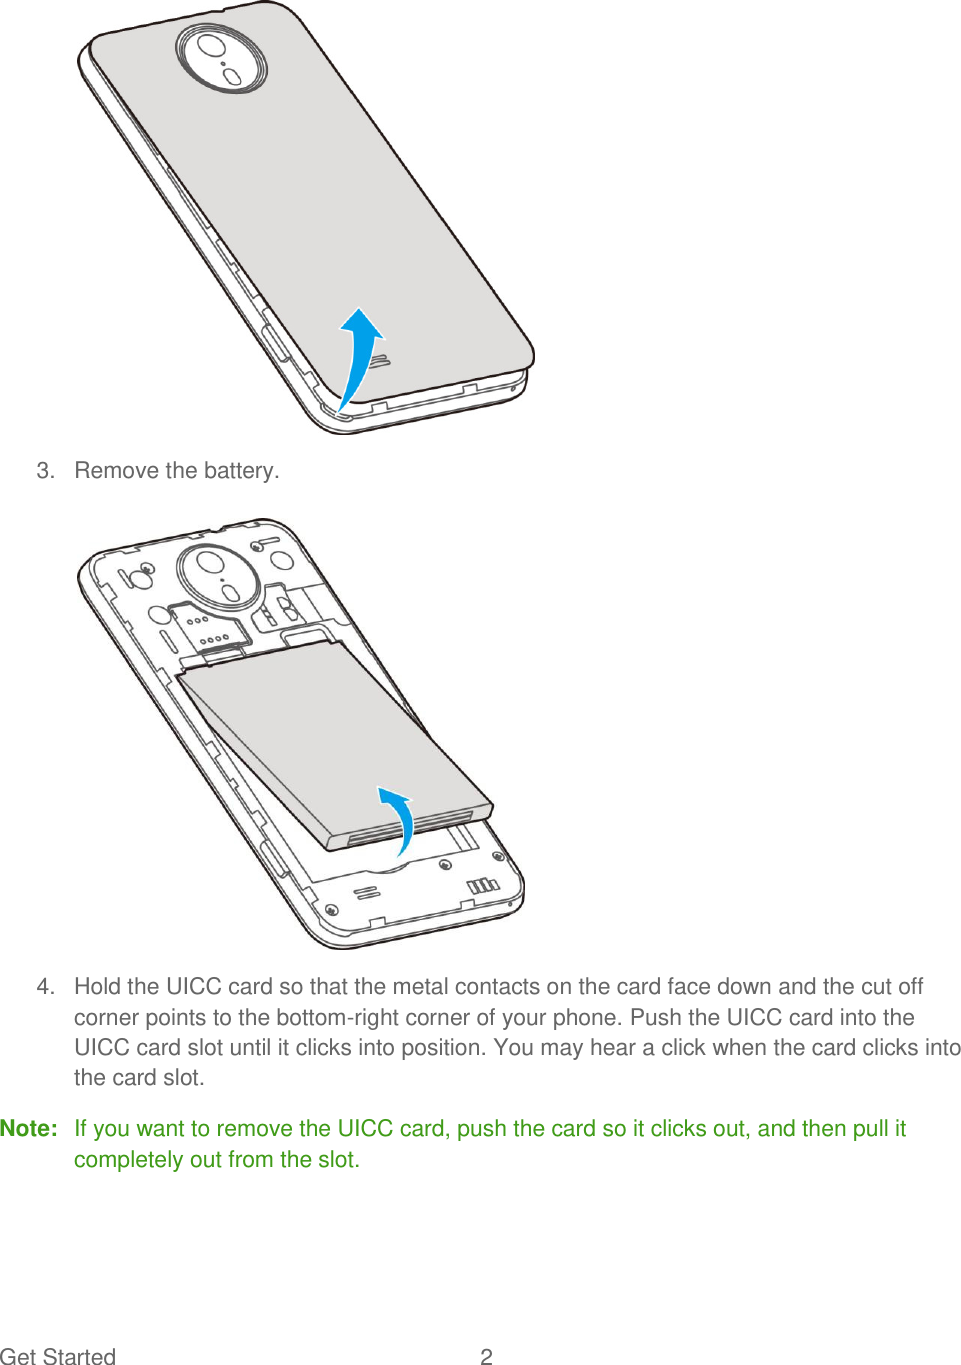 Get Started  2     3.  Remove the battery.    4.  Hold the UICC card so that the metal contacts on the card face down and the cut off corner points to the bottom-right corner of your phone. Push the UICC card into the UICC card slot until it clicks into position. You may hear a click when the card clicks into the card slot. Note:  If you want to remove the UICC card, push the card so it clicks out, and then pull it completely out from the slot.  